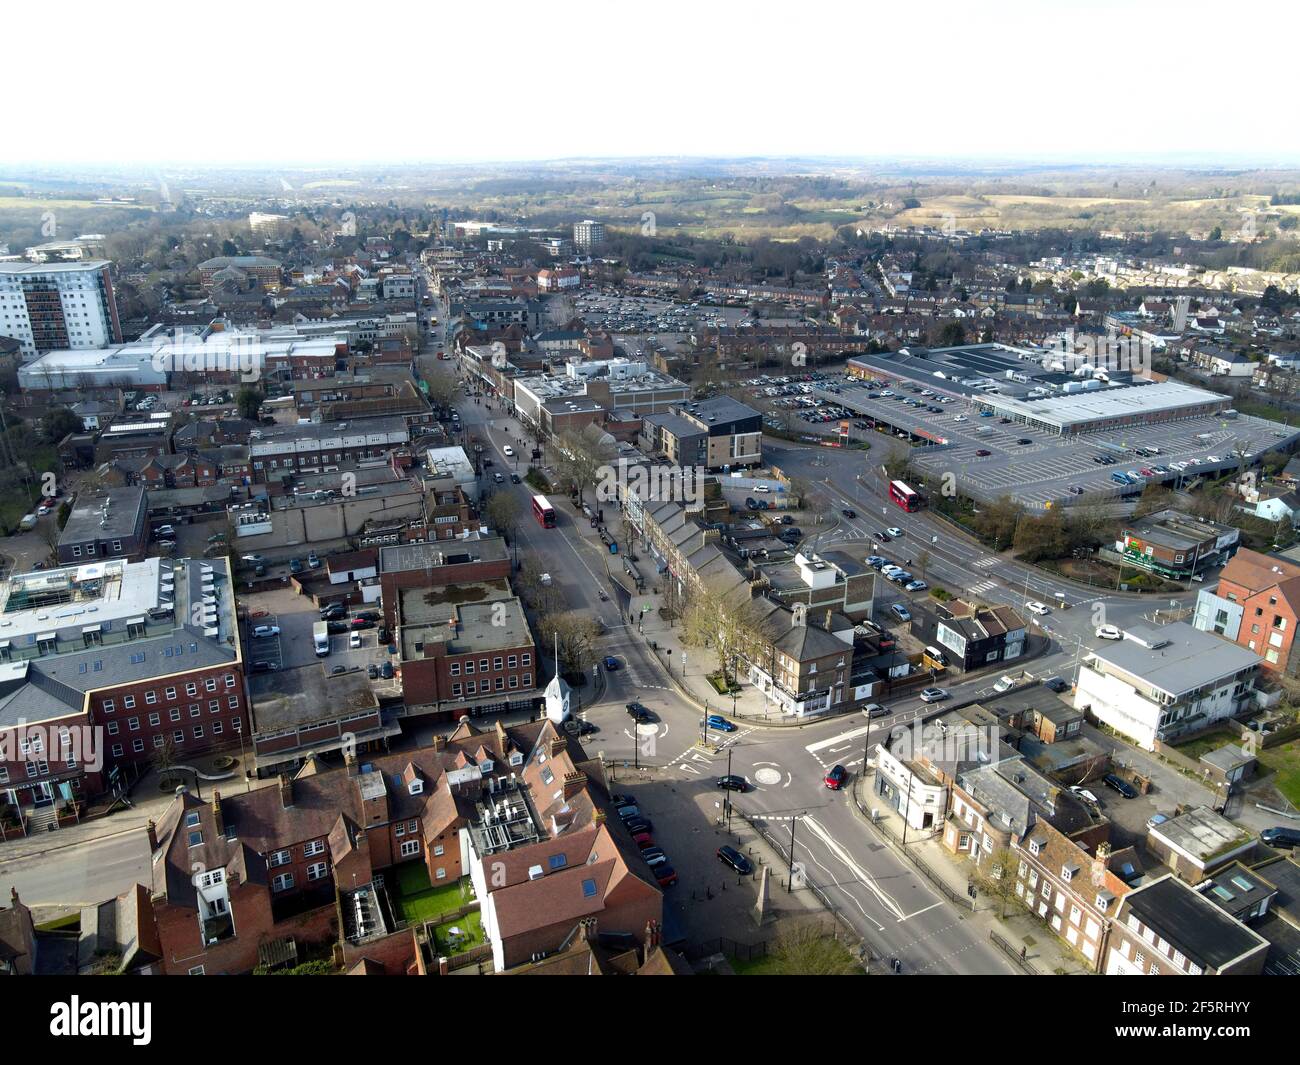 Brentwood Essex UK High Street Aerial view of town Stock Photo